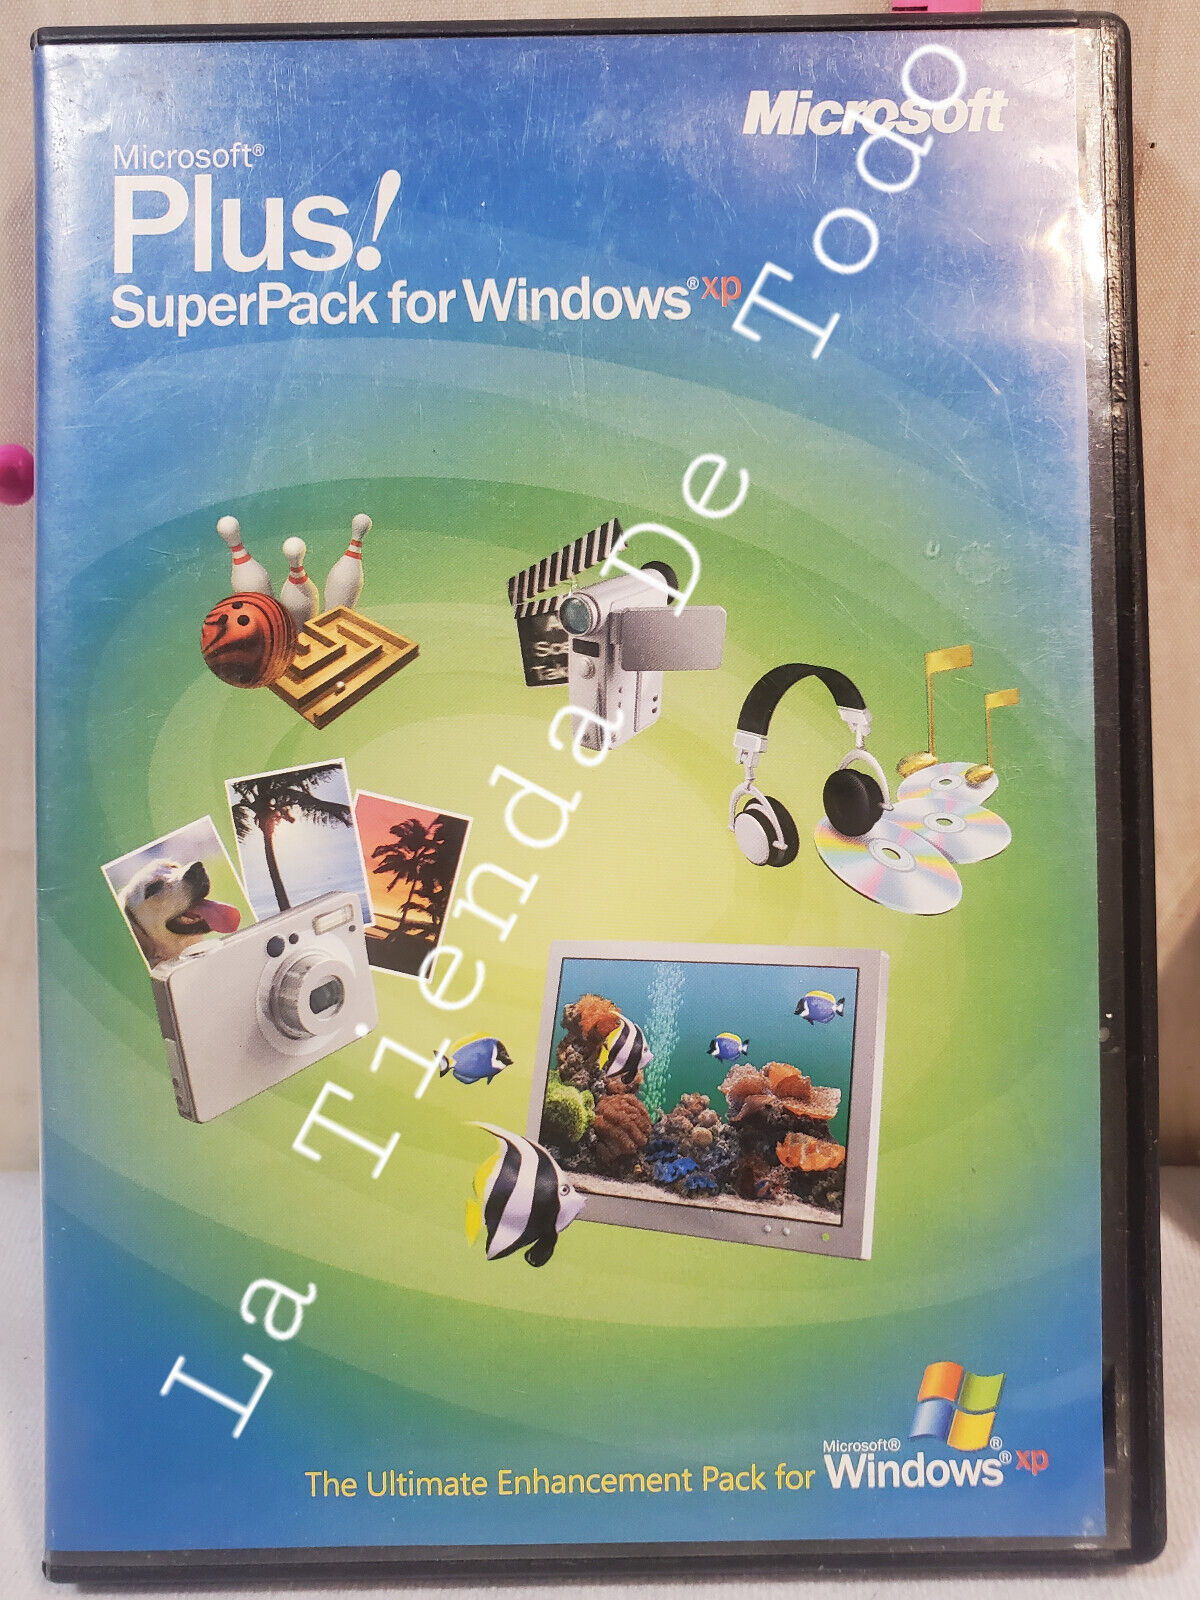 MICROSOFT PLUS SUPERPACK FOR XP SOLD AS NOVELTY COLLECTIBLE DECOR MOVIE PROP